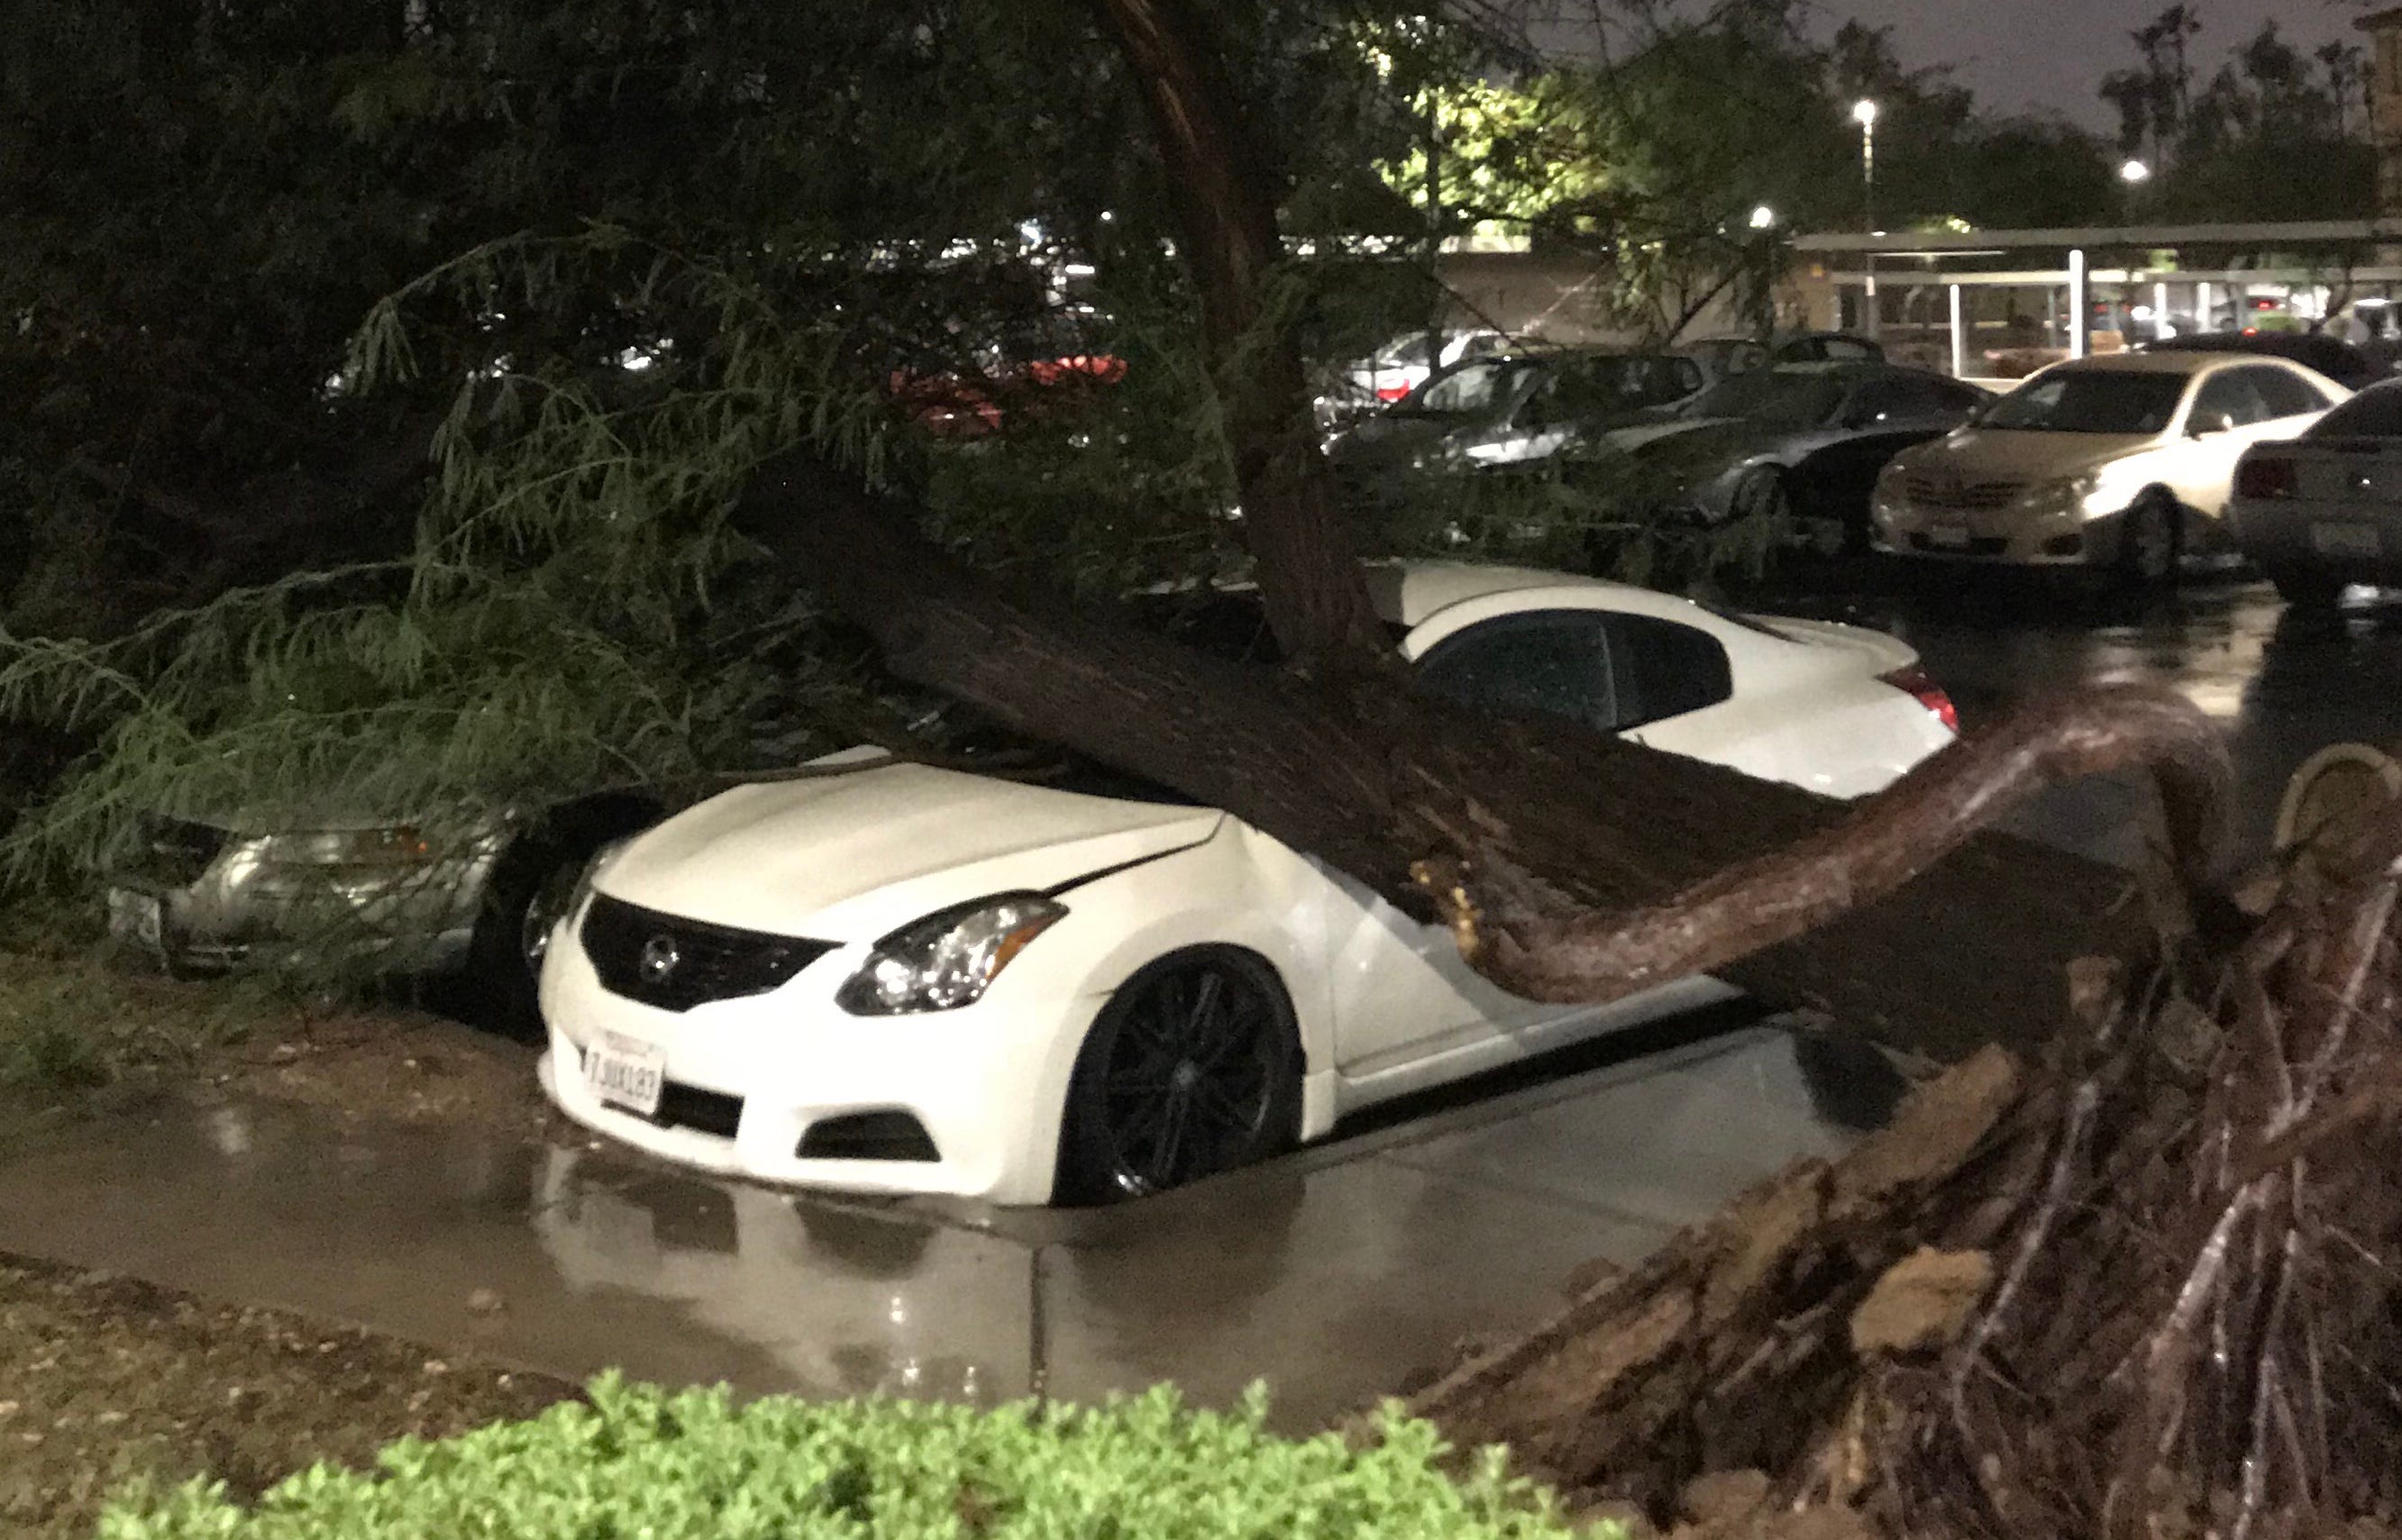 Road closures, cleanup continue after strong monsoon storm pummels Phoenix area